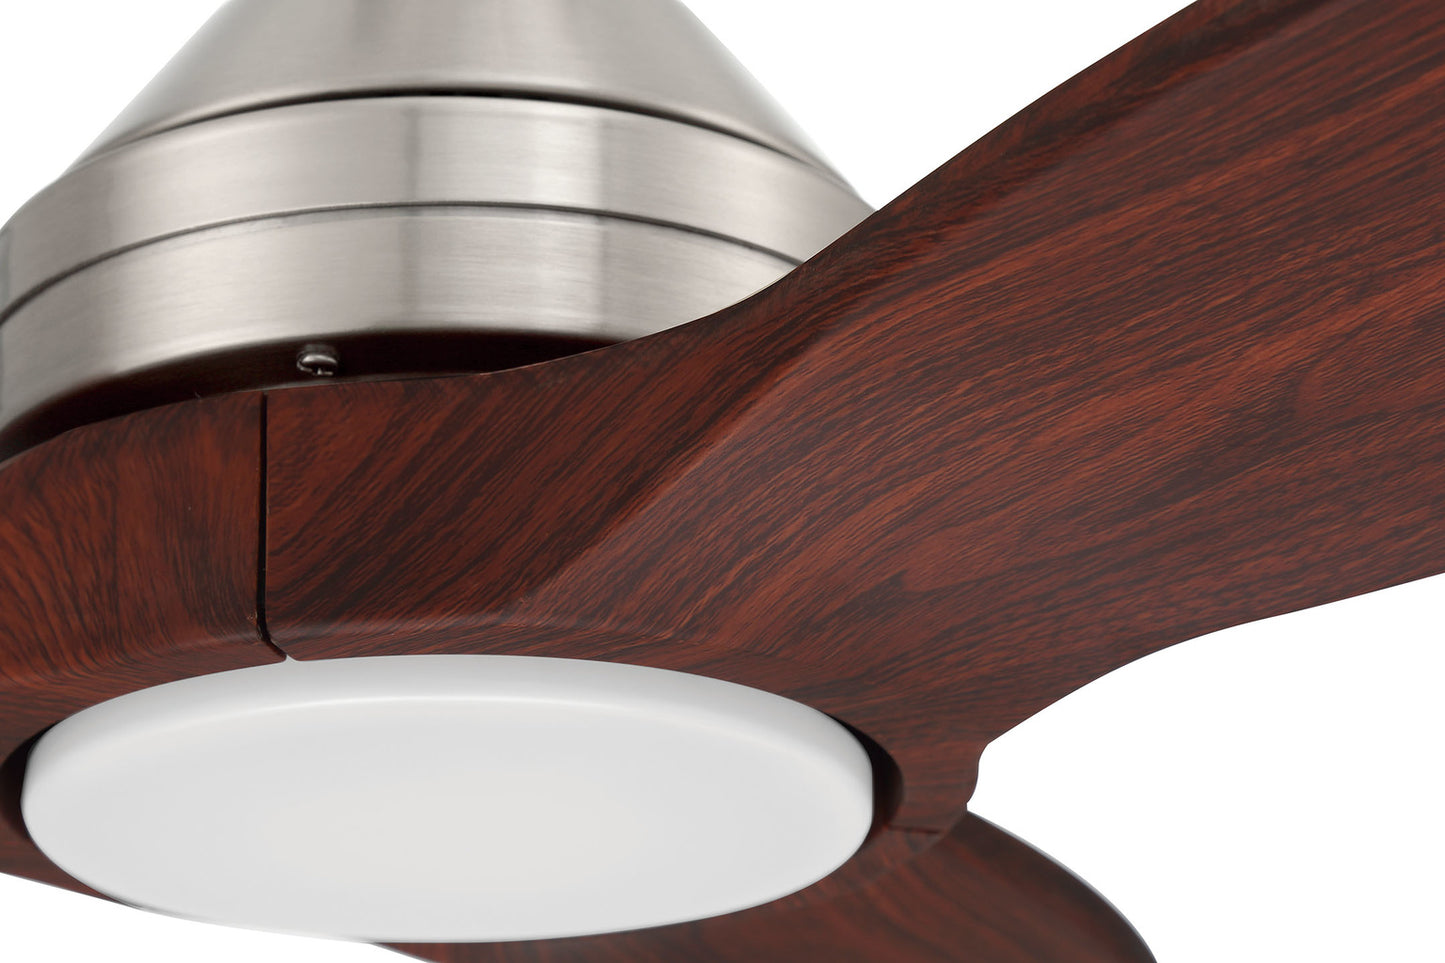 Craftmade - 60" Limerick Ceiling Fan in Brushed Polished Nickel with LED Light and Walnut Blades included